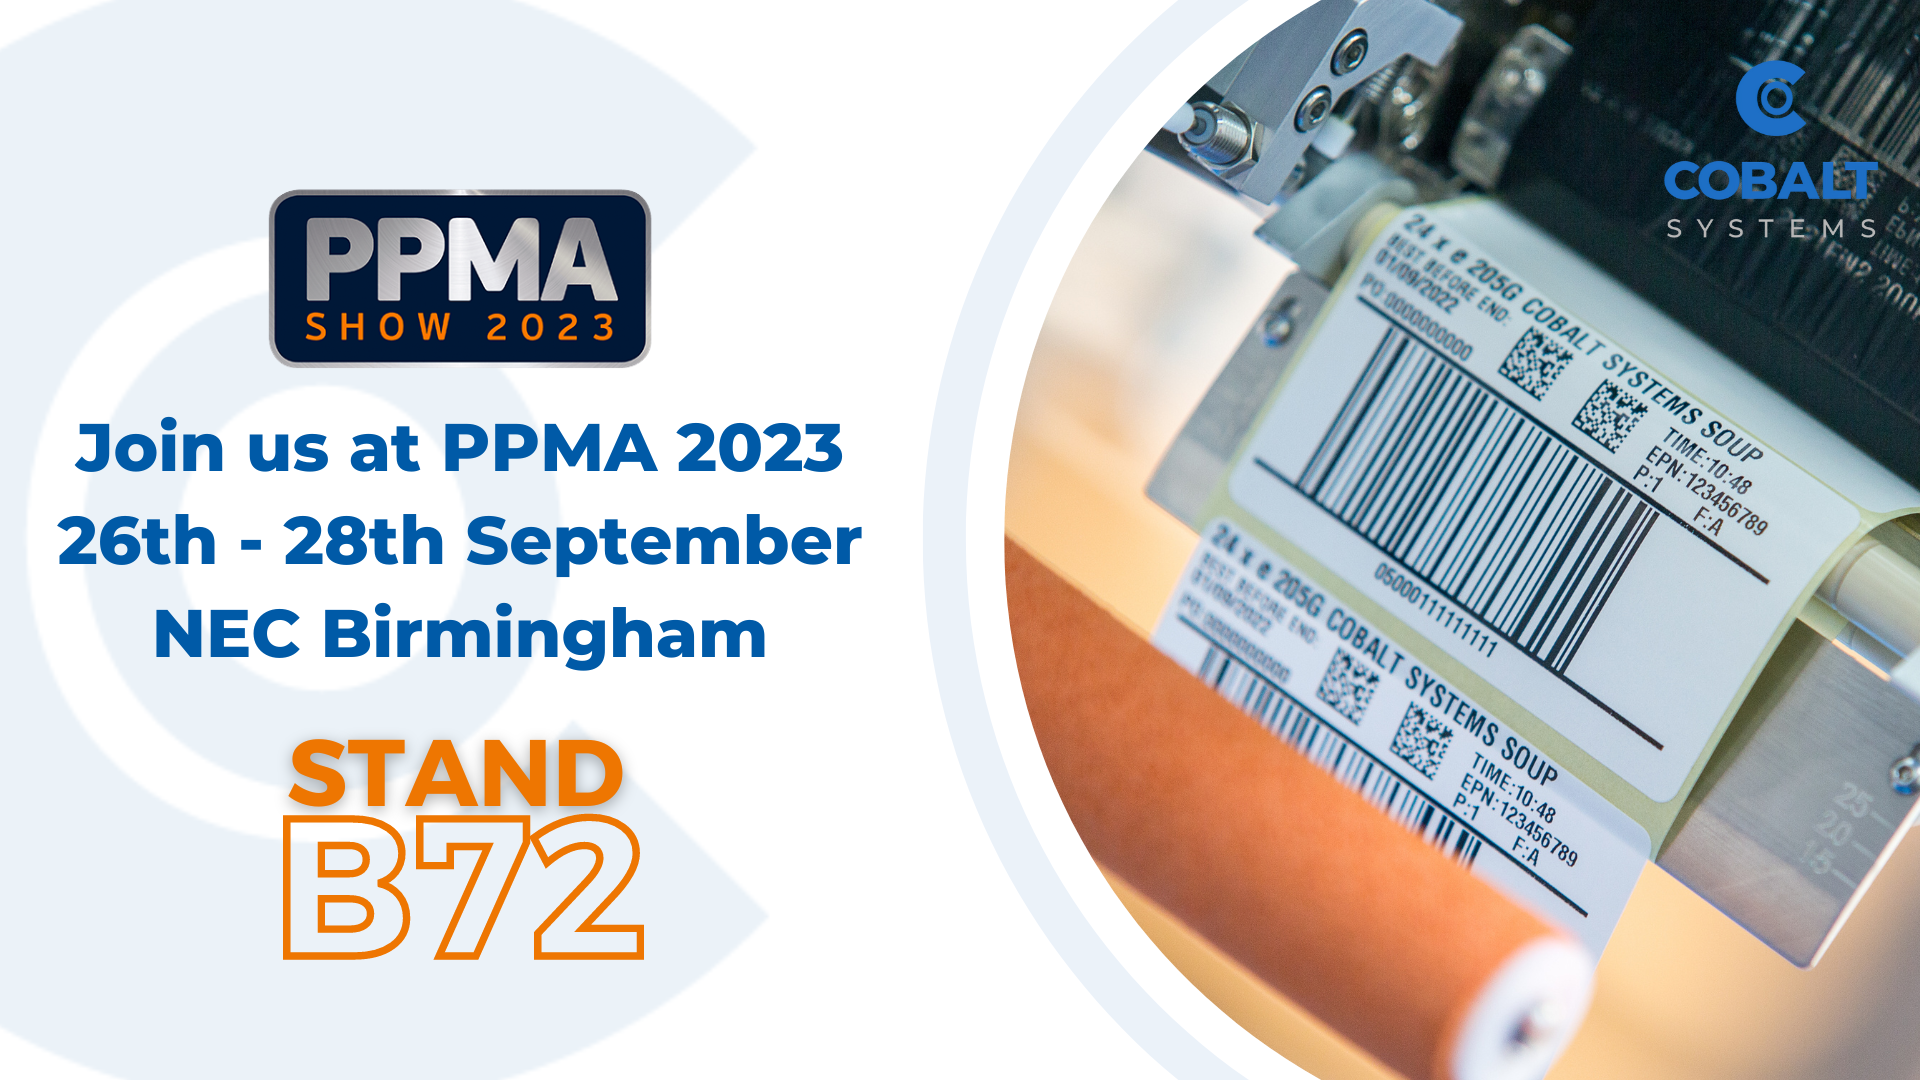 Cobalt Systems drives forward with green labelling automation at PPMA 2023